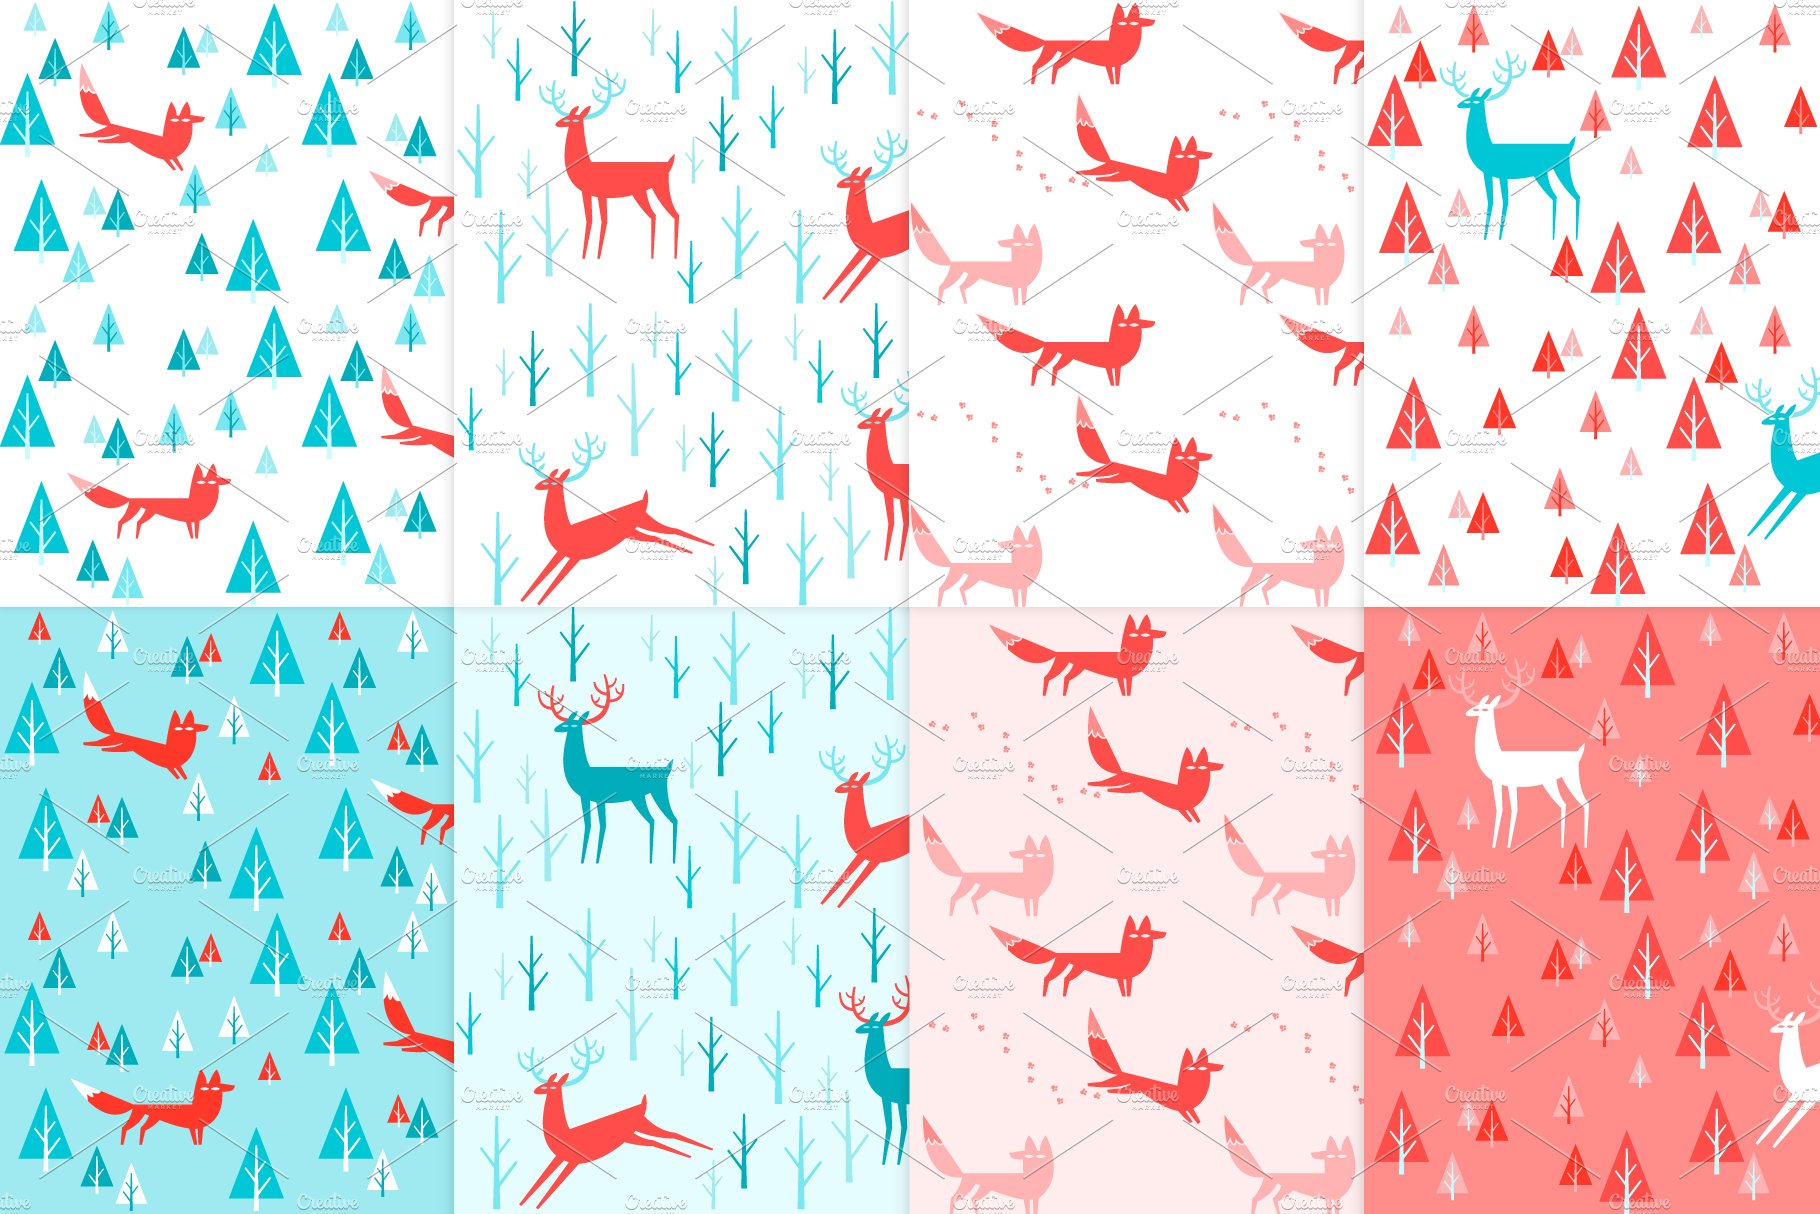 8 Foxes and Deers Seamless Patterns.